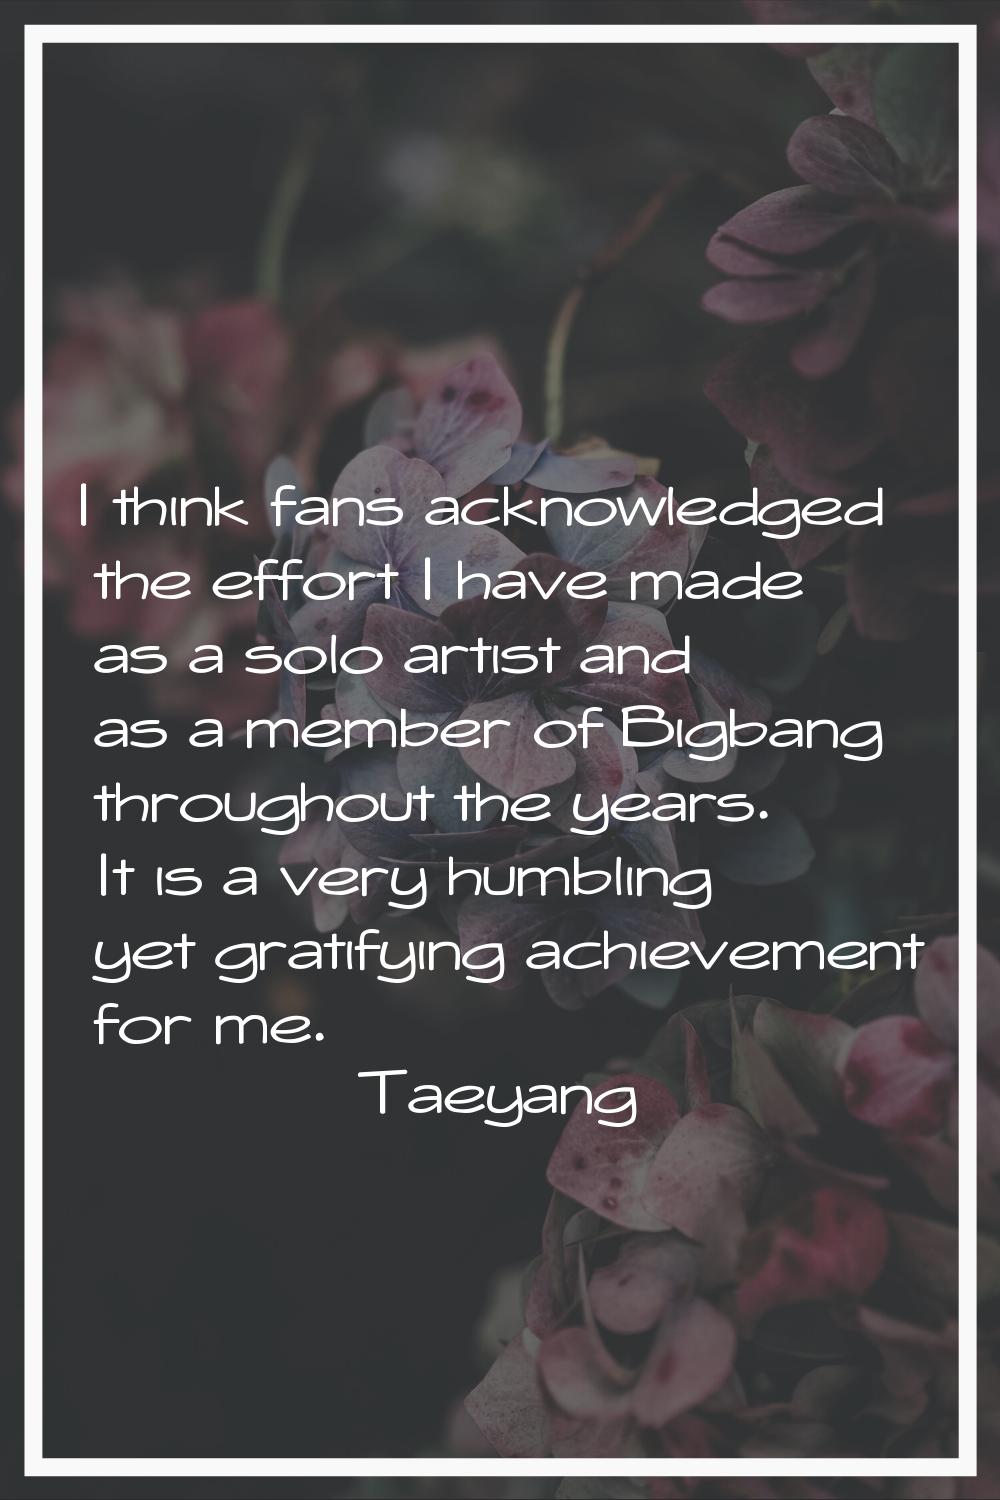 I think fans acknowledged the effort I have made as a solo artist and as a member of Bigbang throug